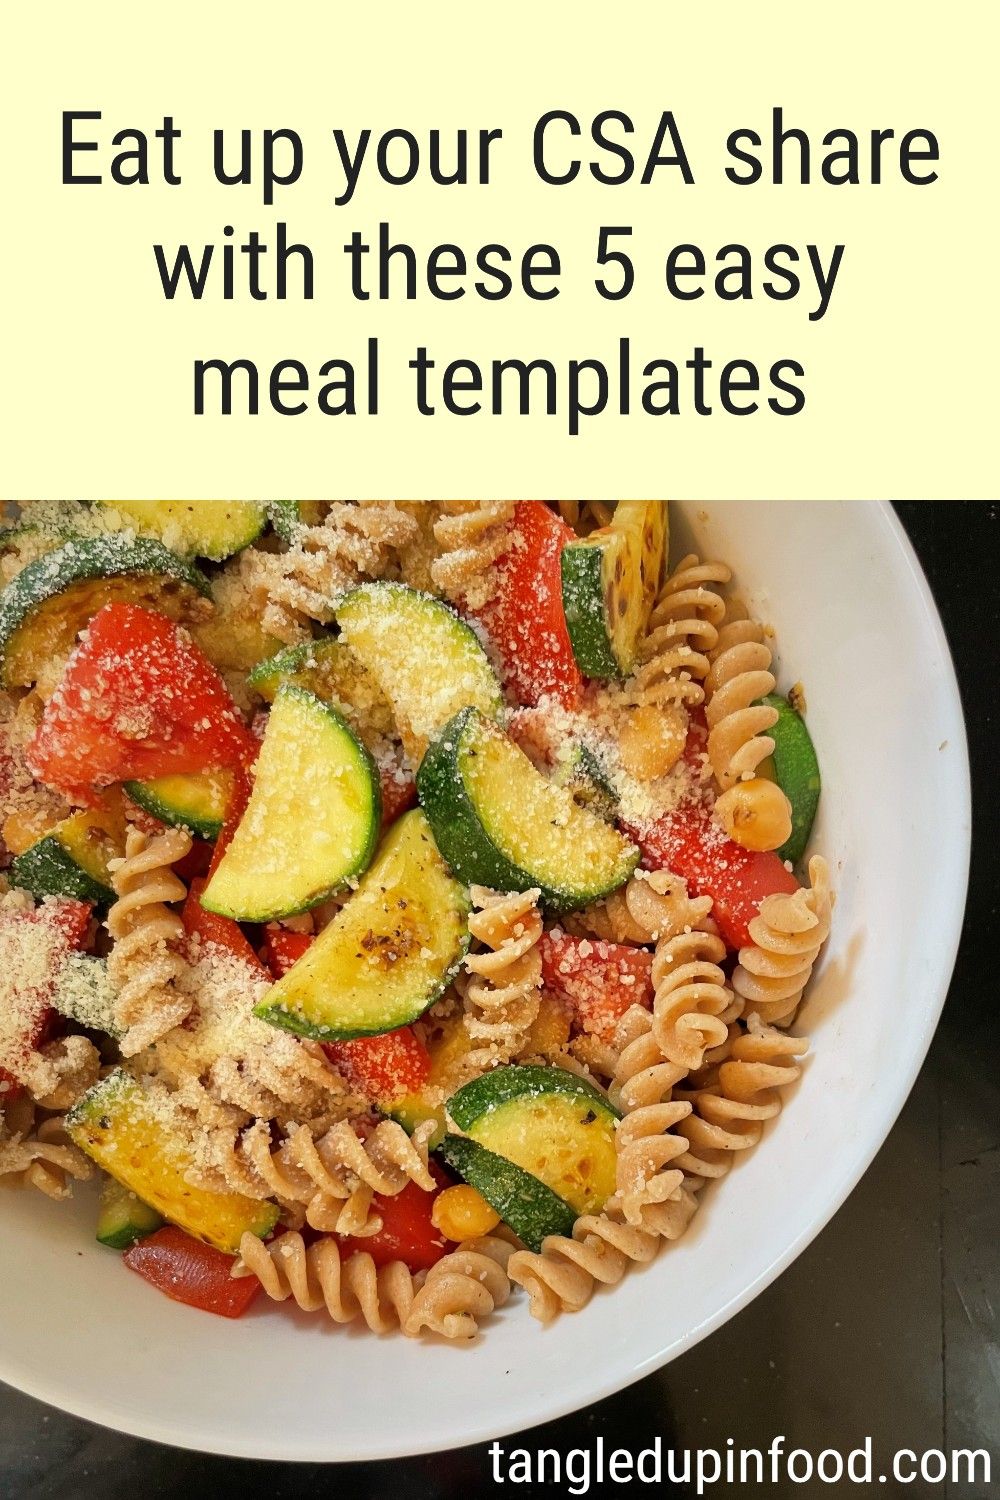 Bowl of rotini pasta with zucchini and tomates with text reading "Eat up your CSA share with these 5 easy meal templates"